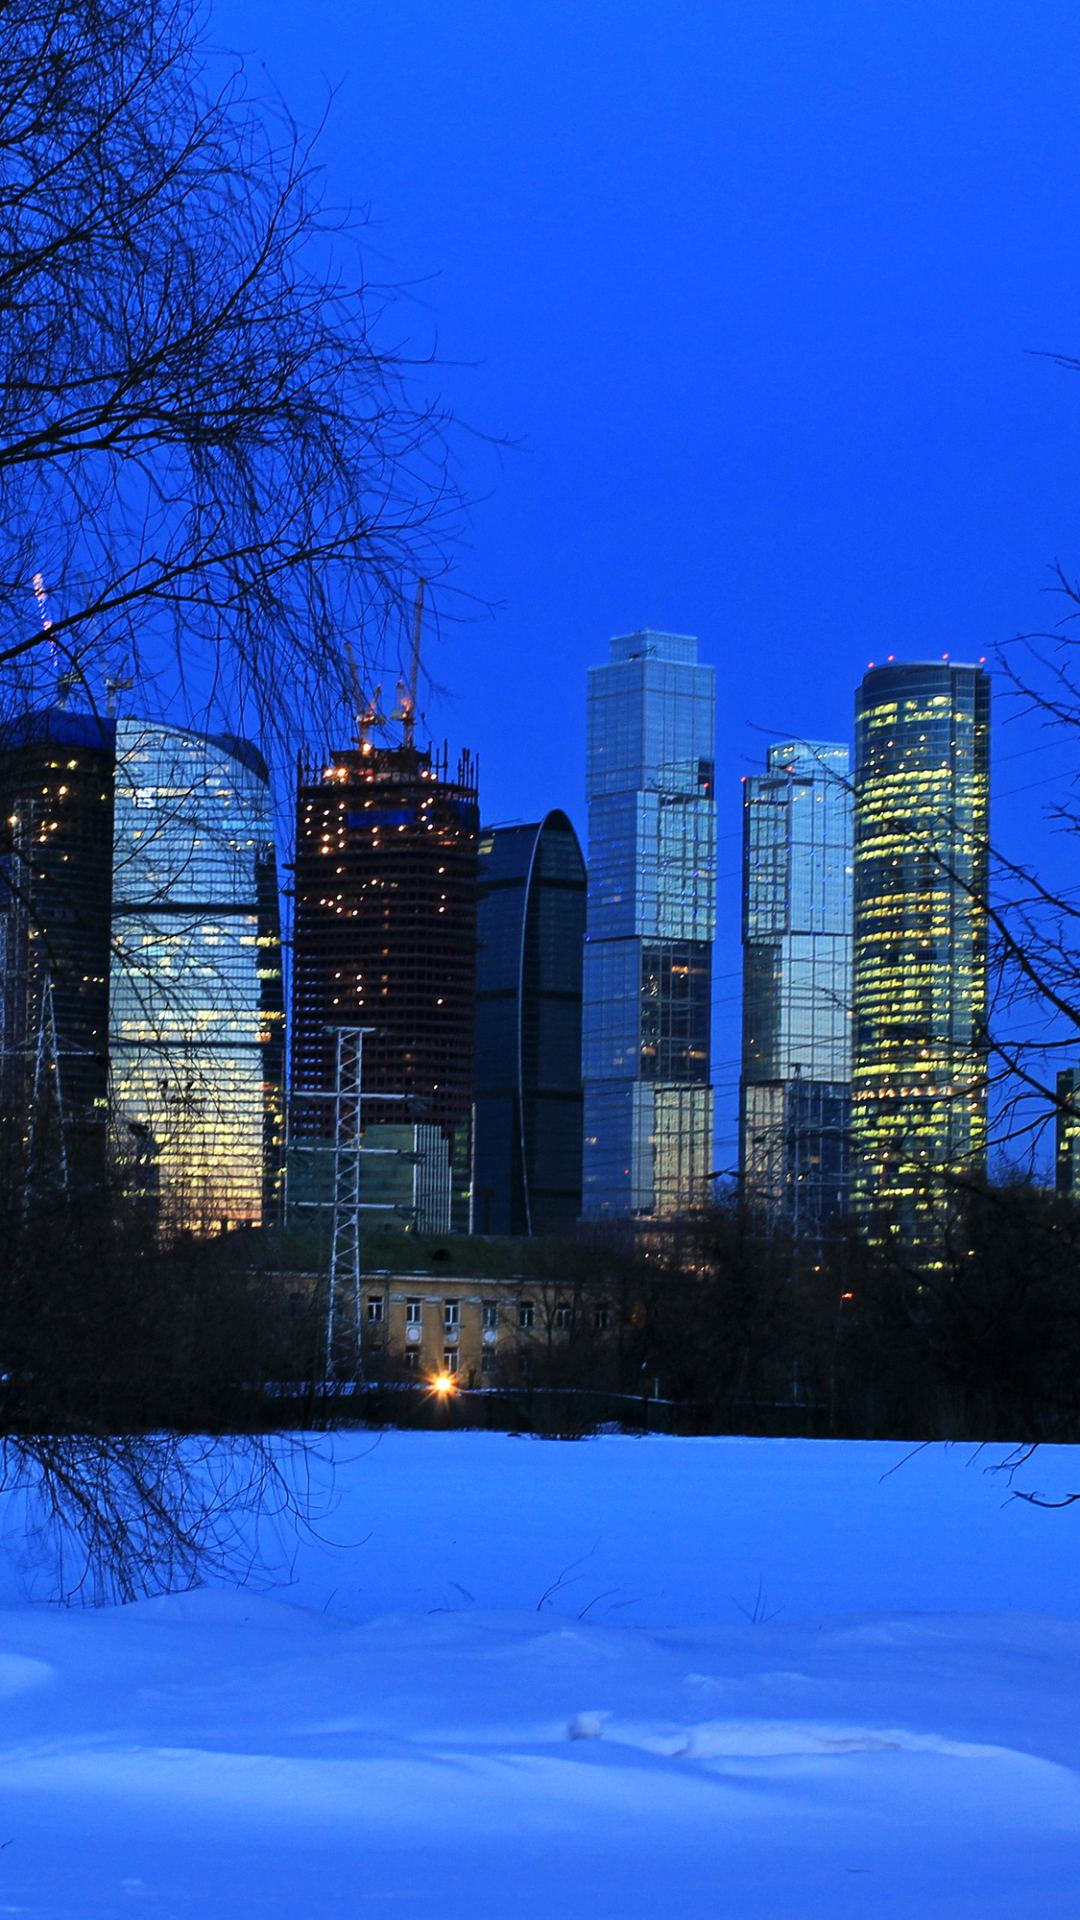 Download mobile wallpaper Cities, Winter, Night, Snow, City, Skyscraper, Light, Tree, Russia, Moscow, Man Made for free.